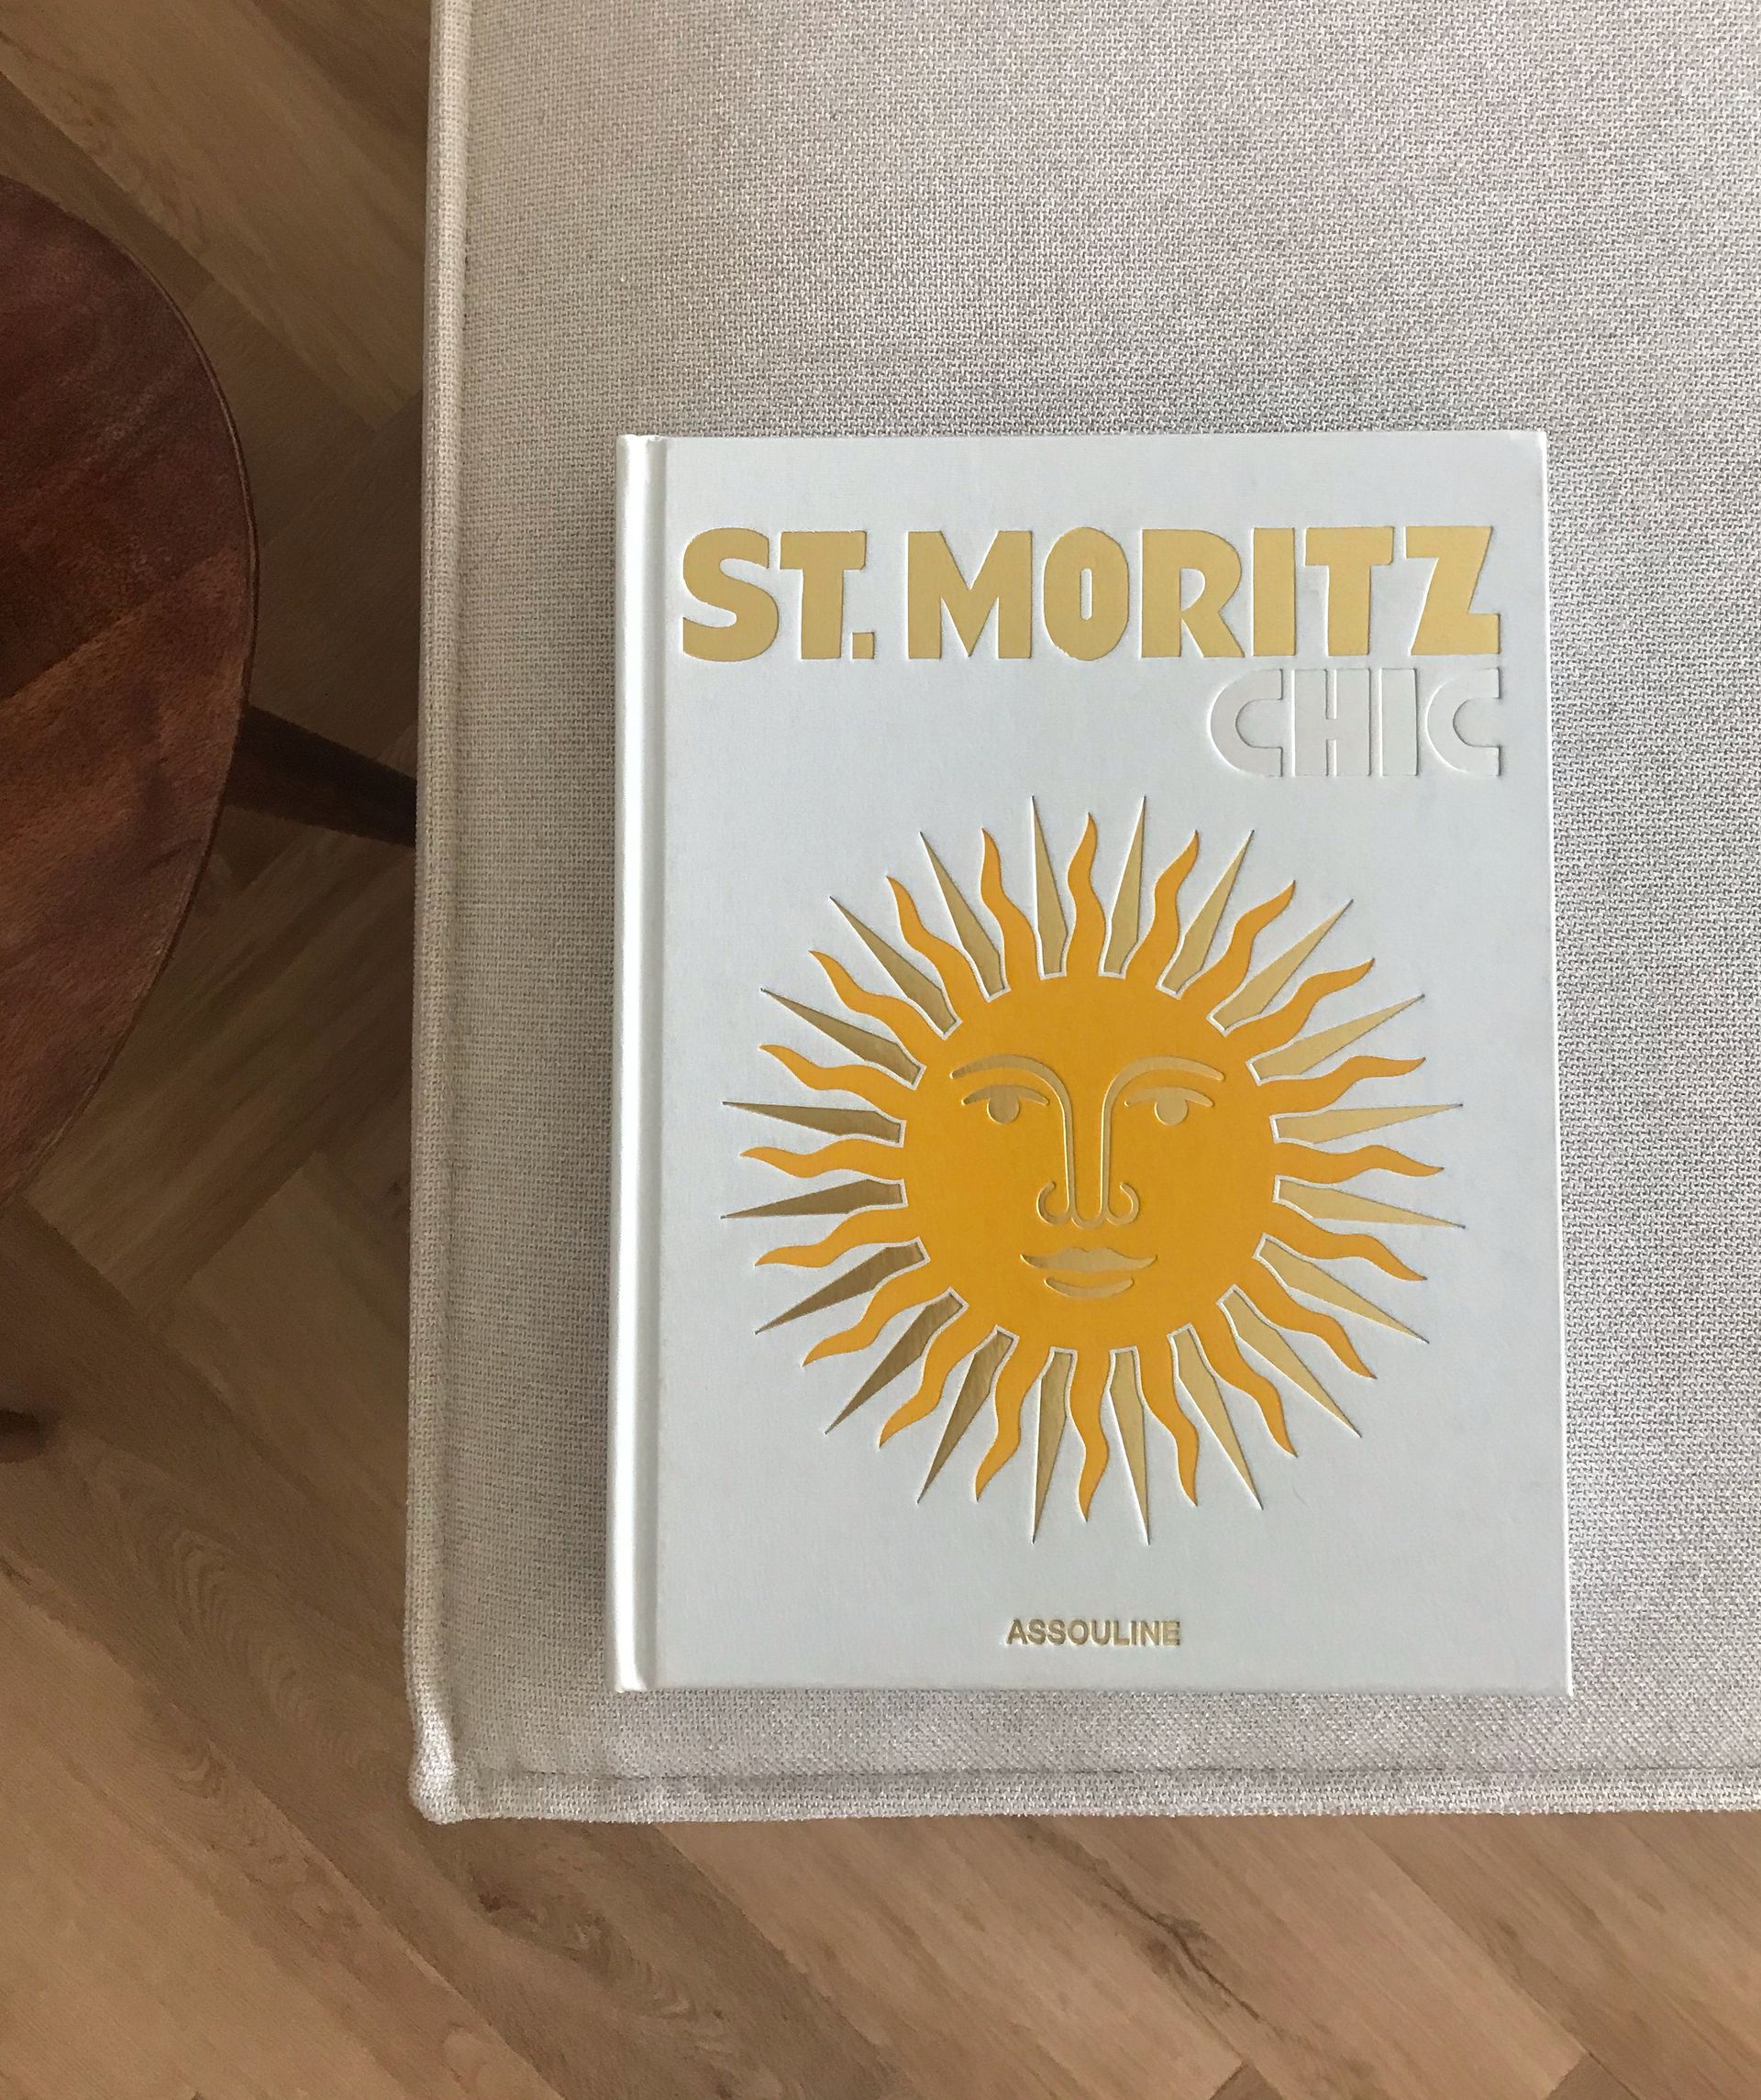 St. Moritz Chic coffee table book